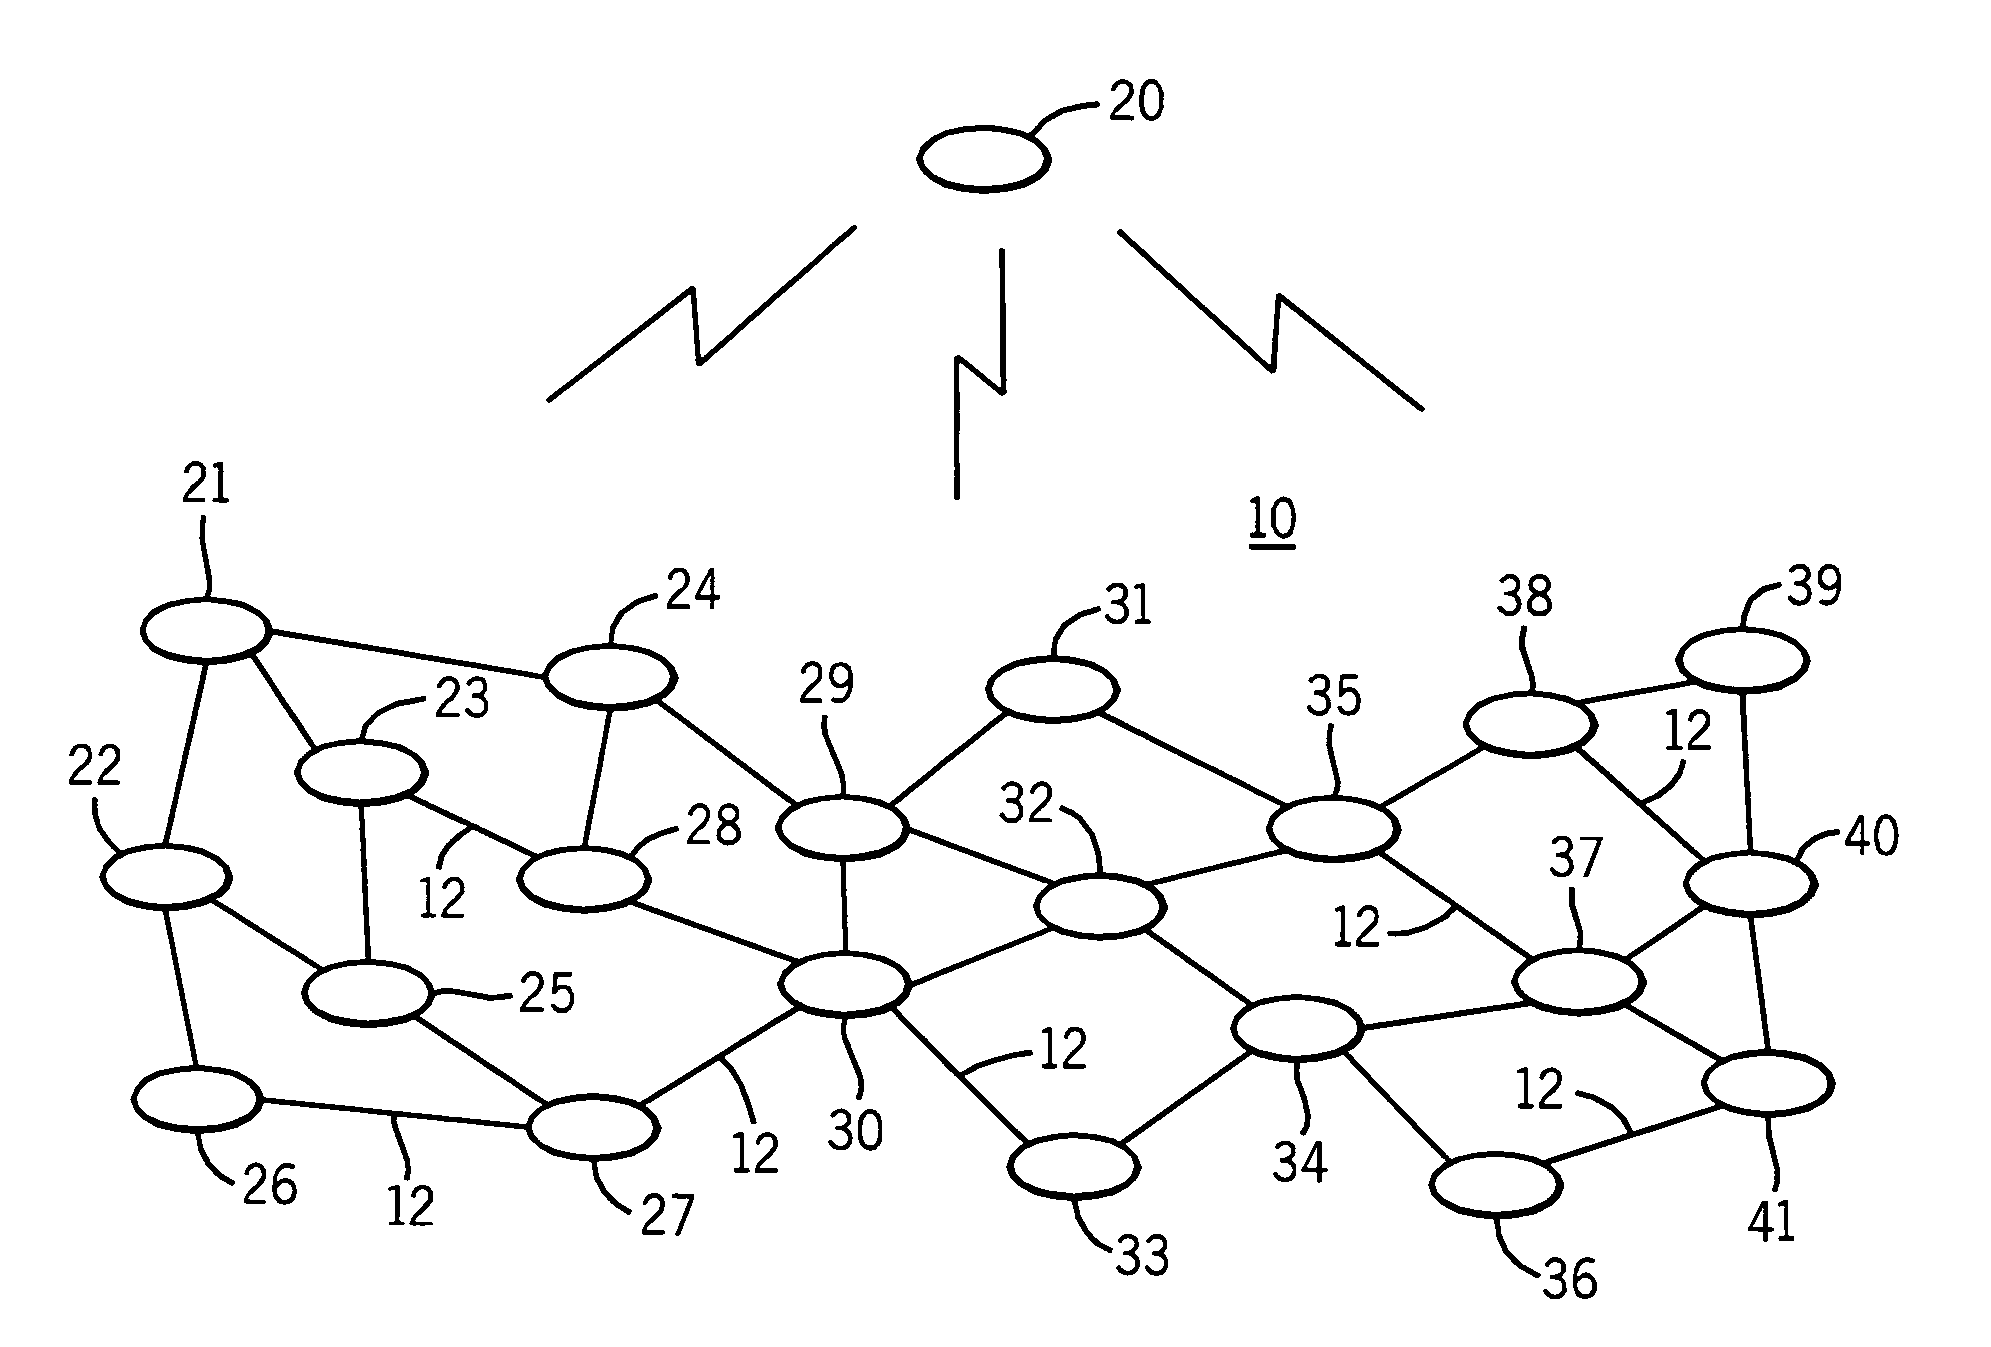 Network routing process for regulating traffic through advantaged and disadvantaged nodes